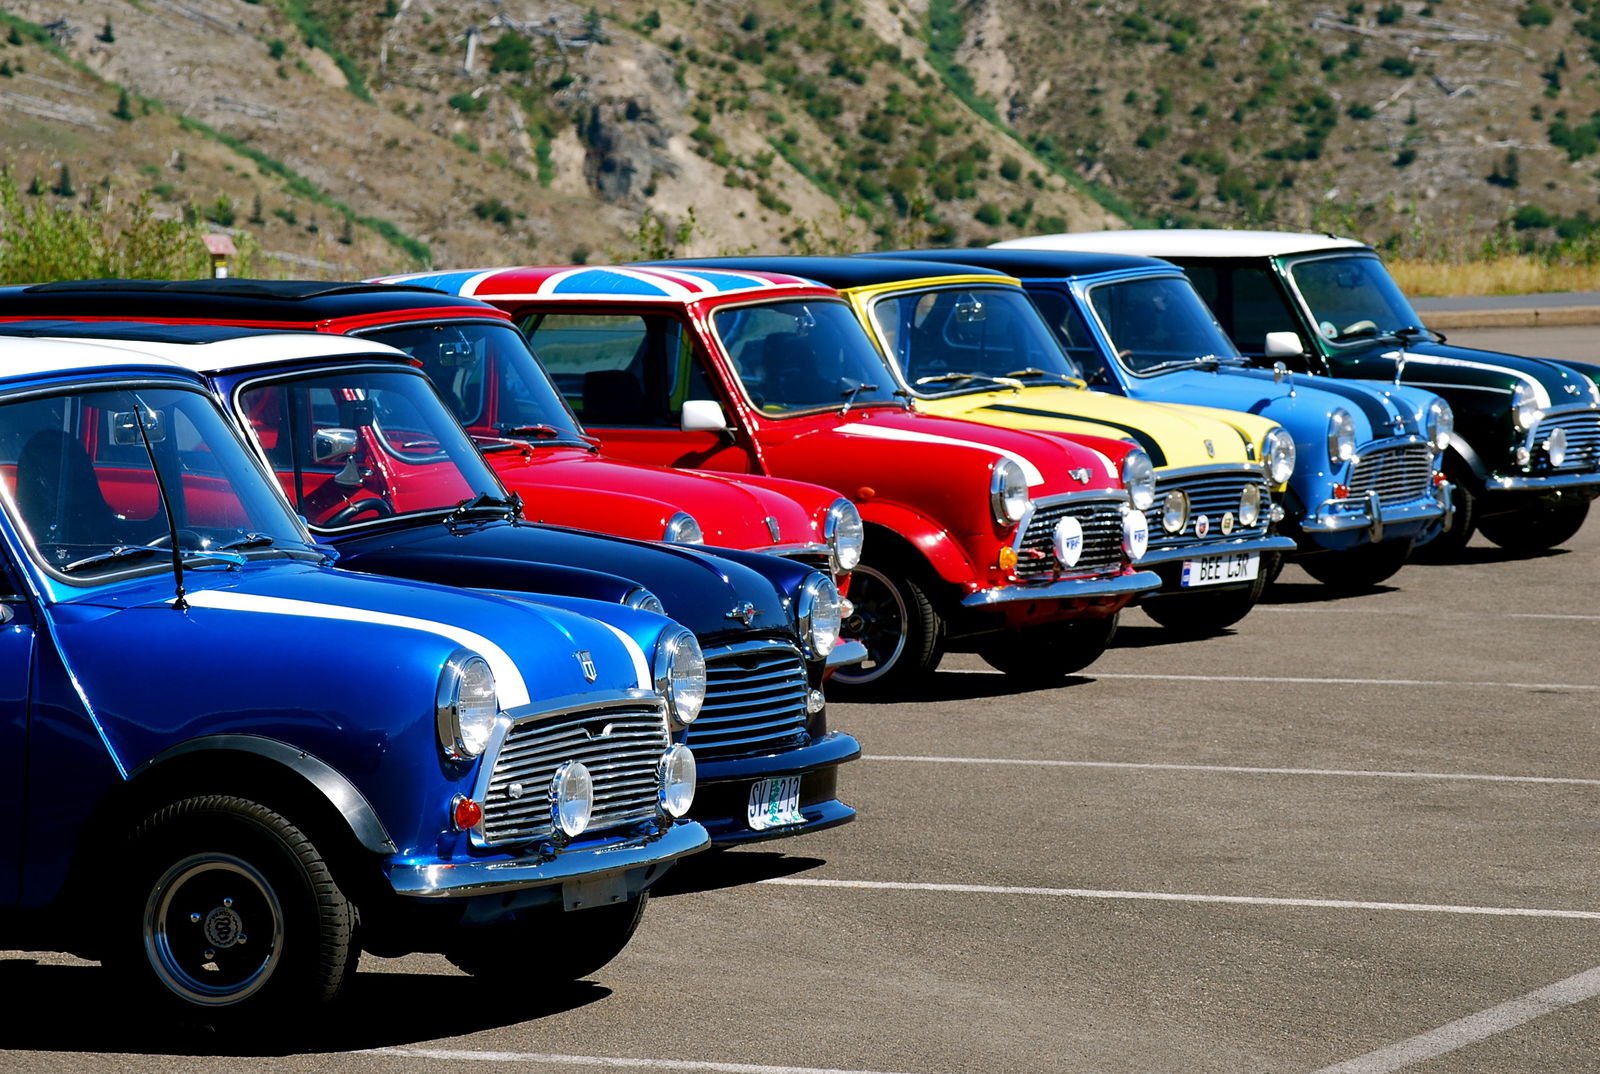 How much are MINI Cooper insurance rates?